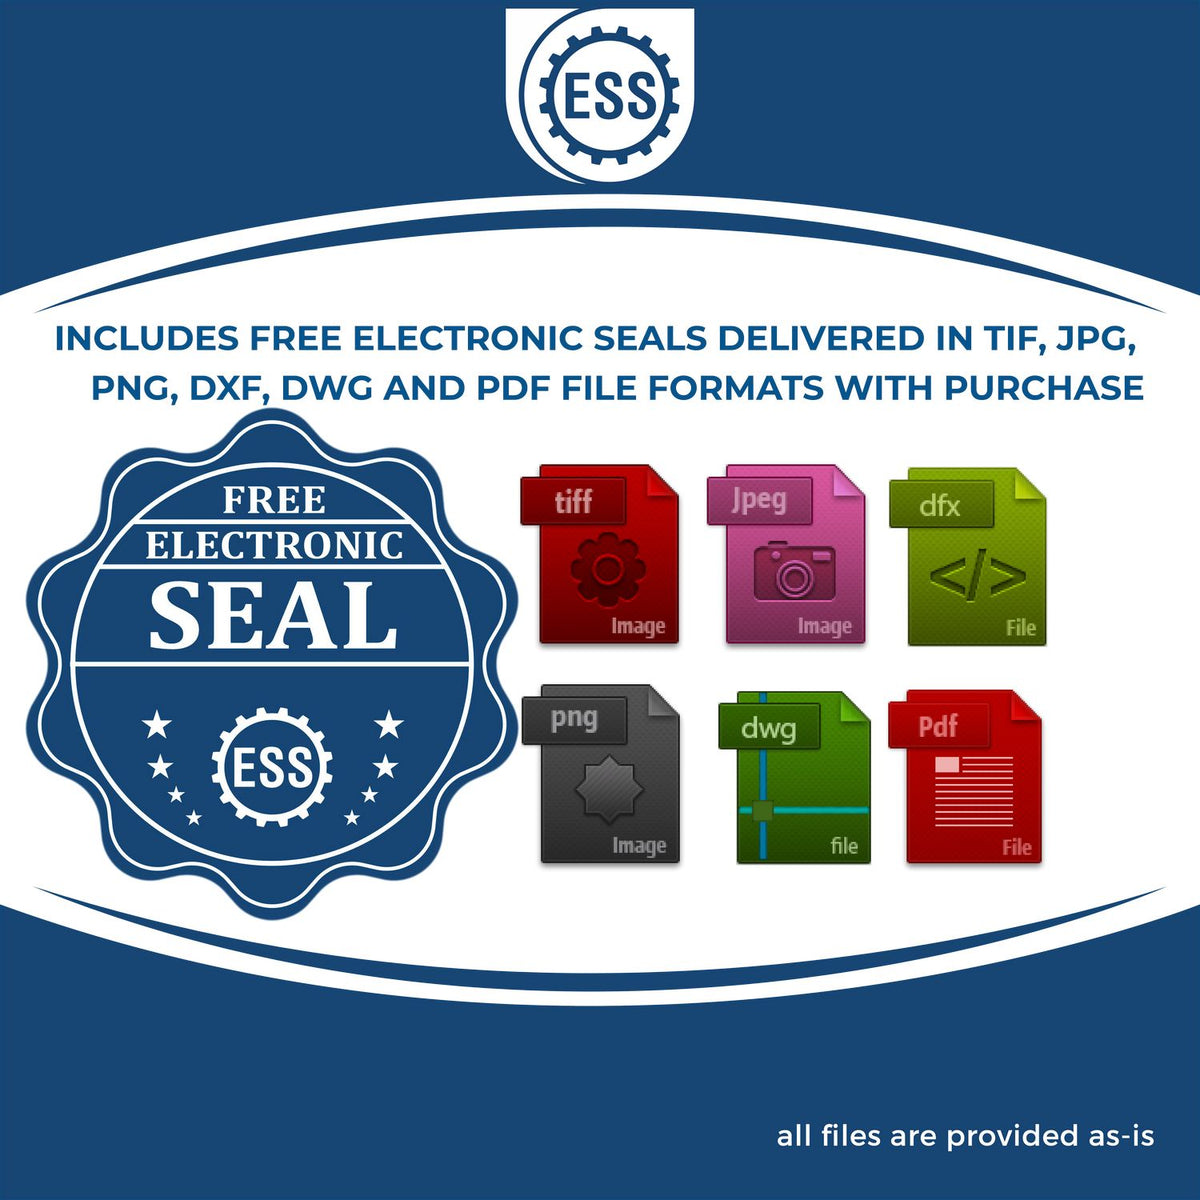 An infographic for the free electronic seal for the State of Maryland Extended Long Reach Engineer Seal illustrating the different file type icons such as DXF, DWG, TIF, JPG and PNG.